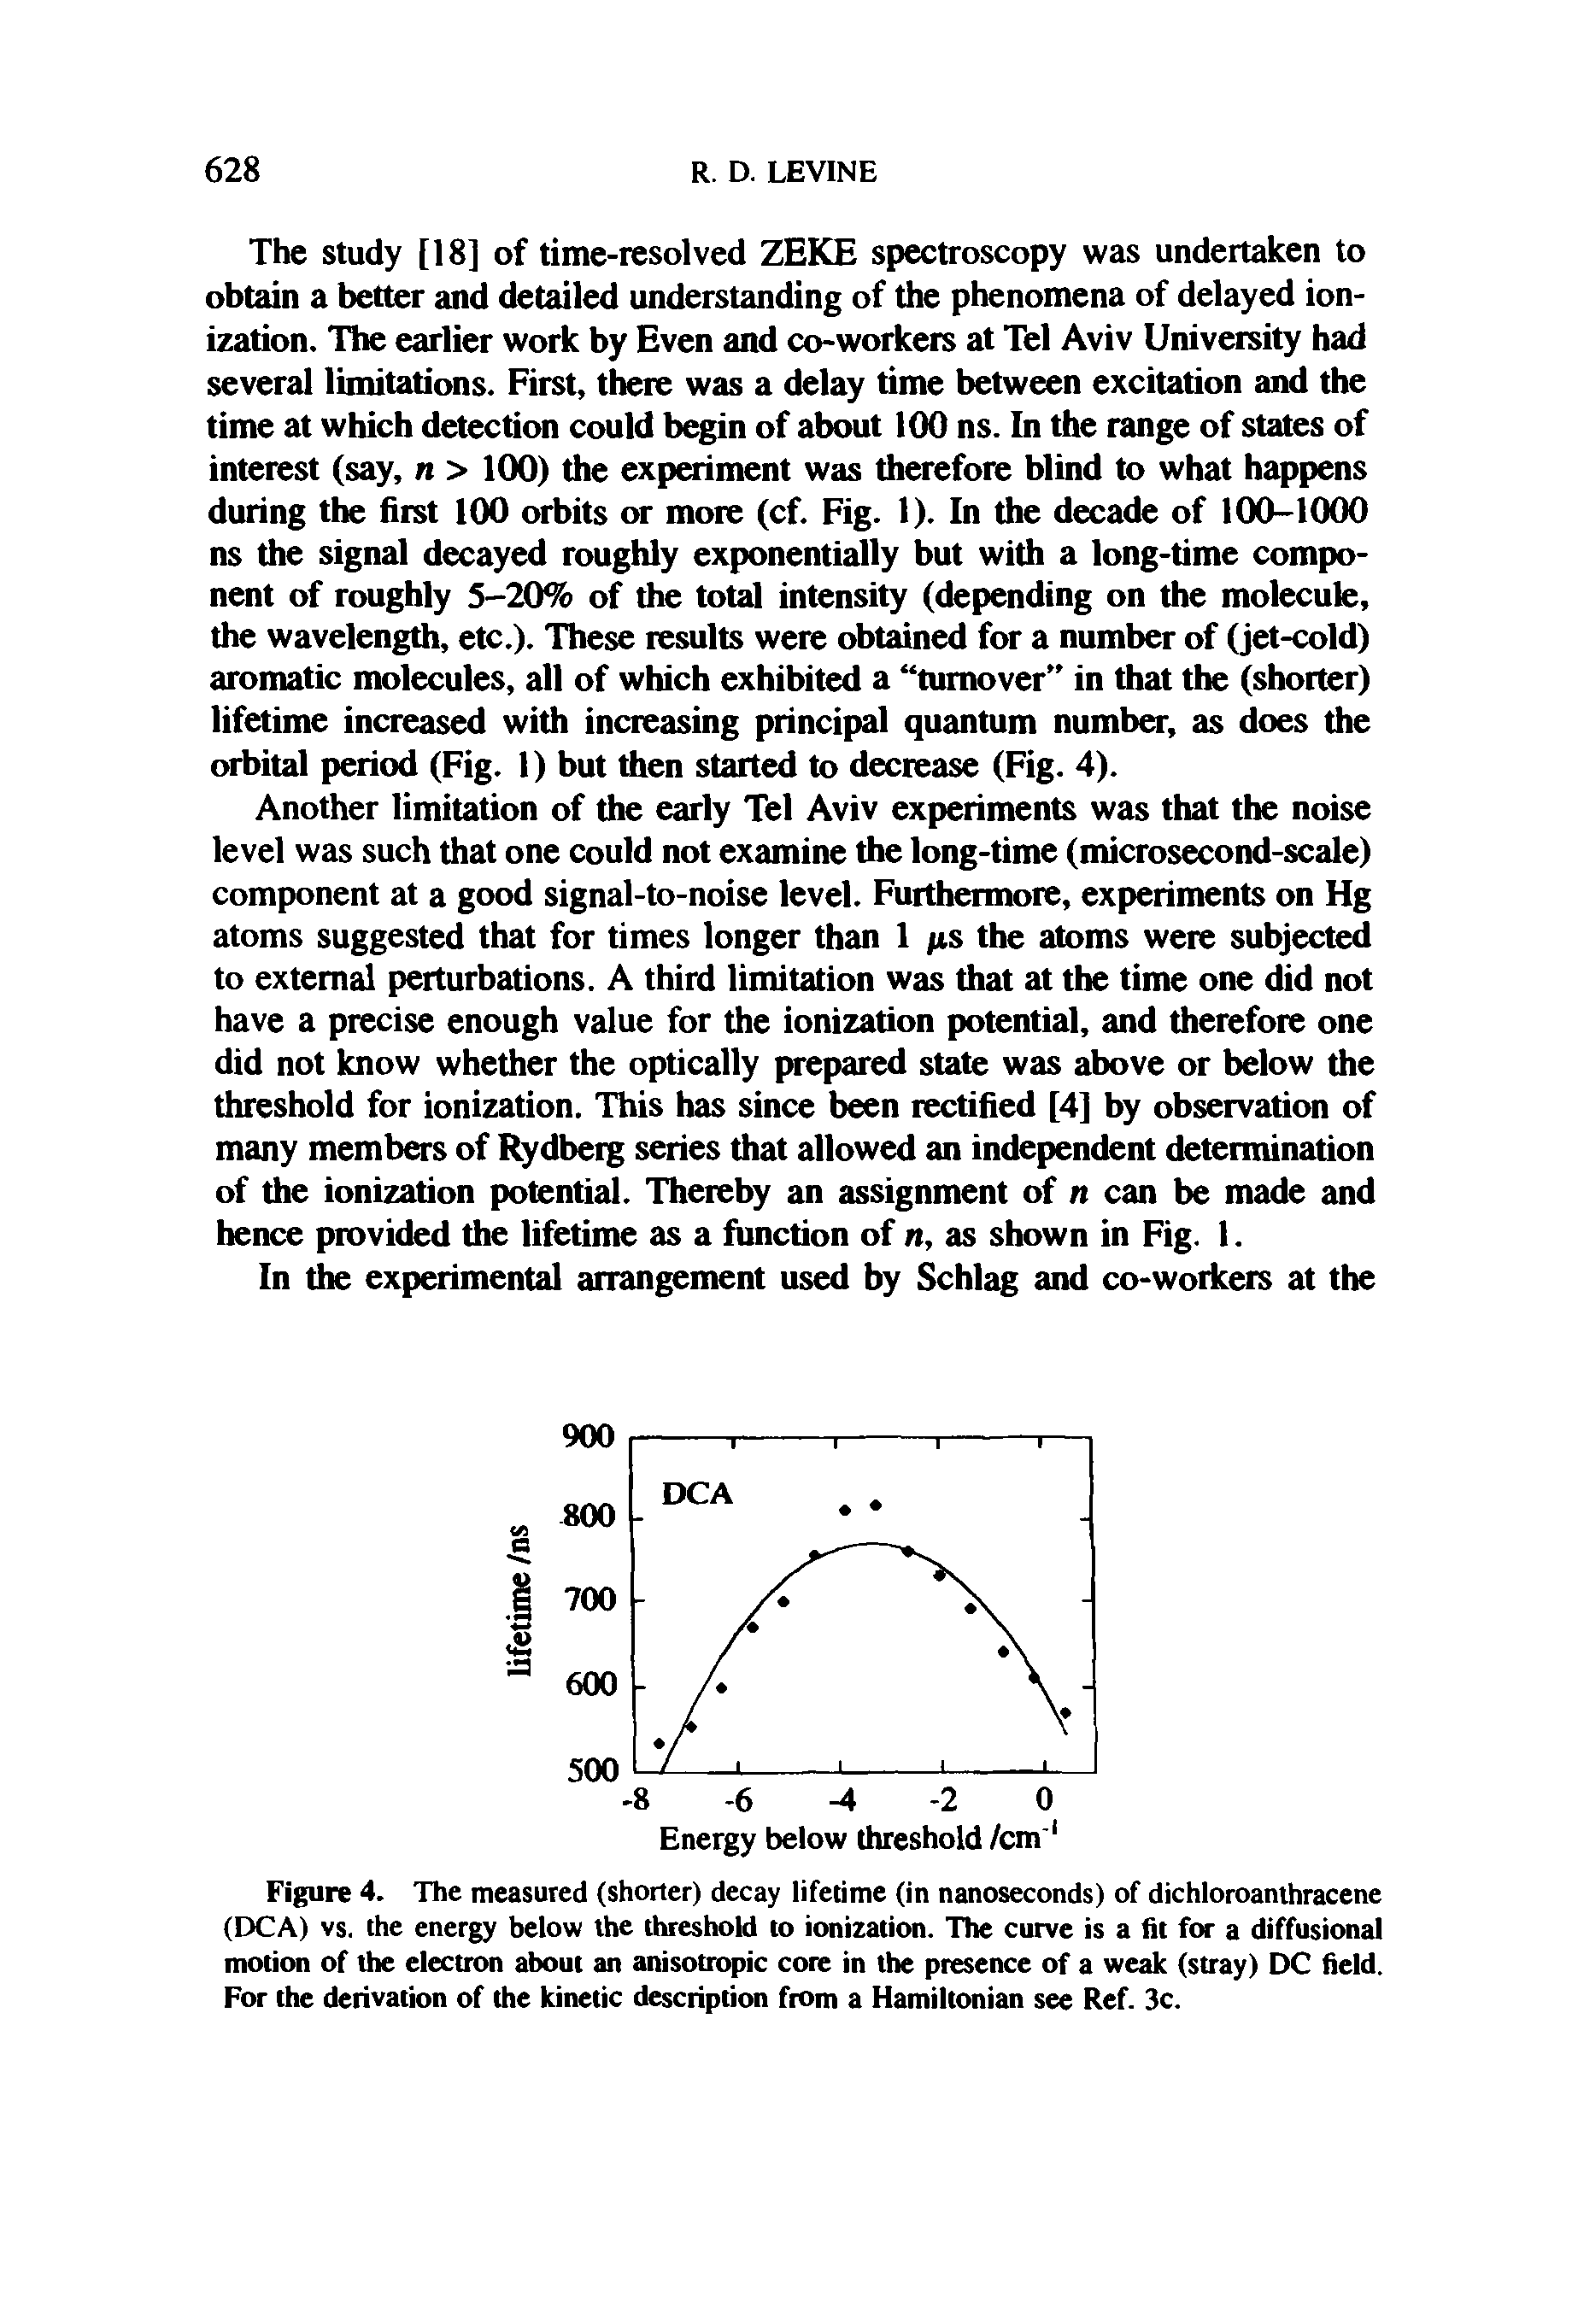 Figure 4. The measured (shorter) decay lifetime (in nanoseconds) of dichloroanthracene (DCA) vs. the energy below the threshold to ionization. The curve is a fit for a diffusional motion of the electron about an anisotropic core in the presence of a weak (stray) DC field. For the derivation of the kinetic description from a Hamiltonian see Ref. 3c.